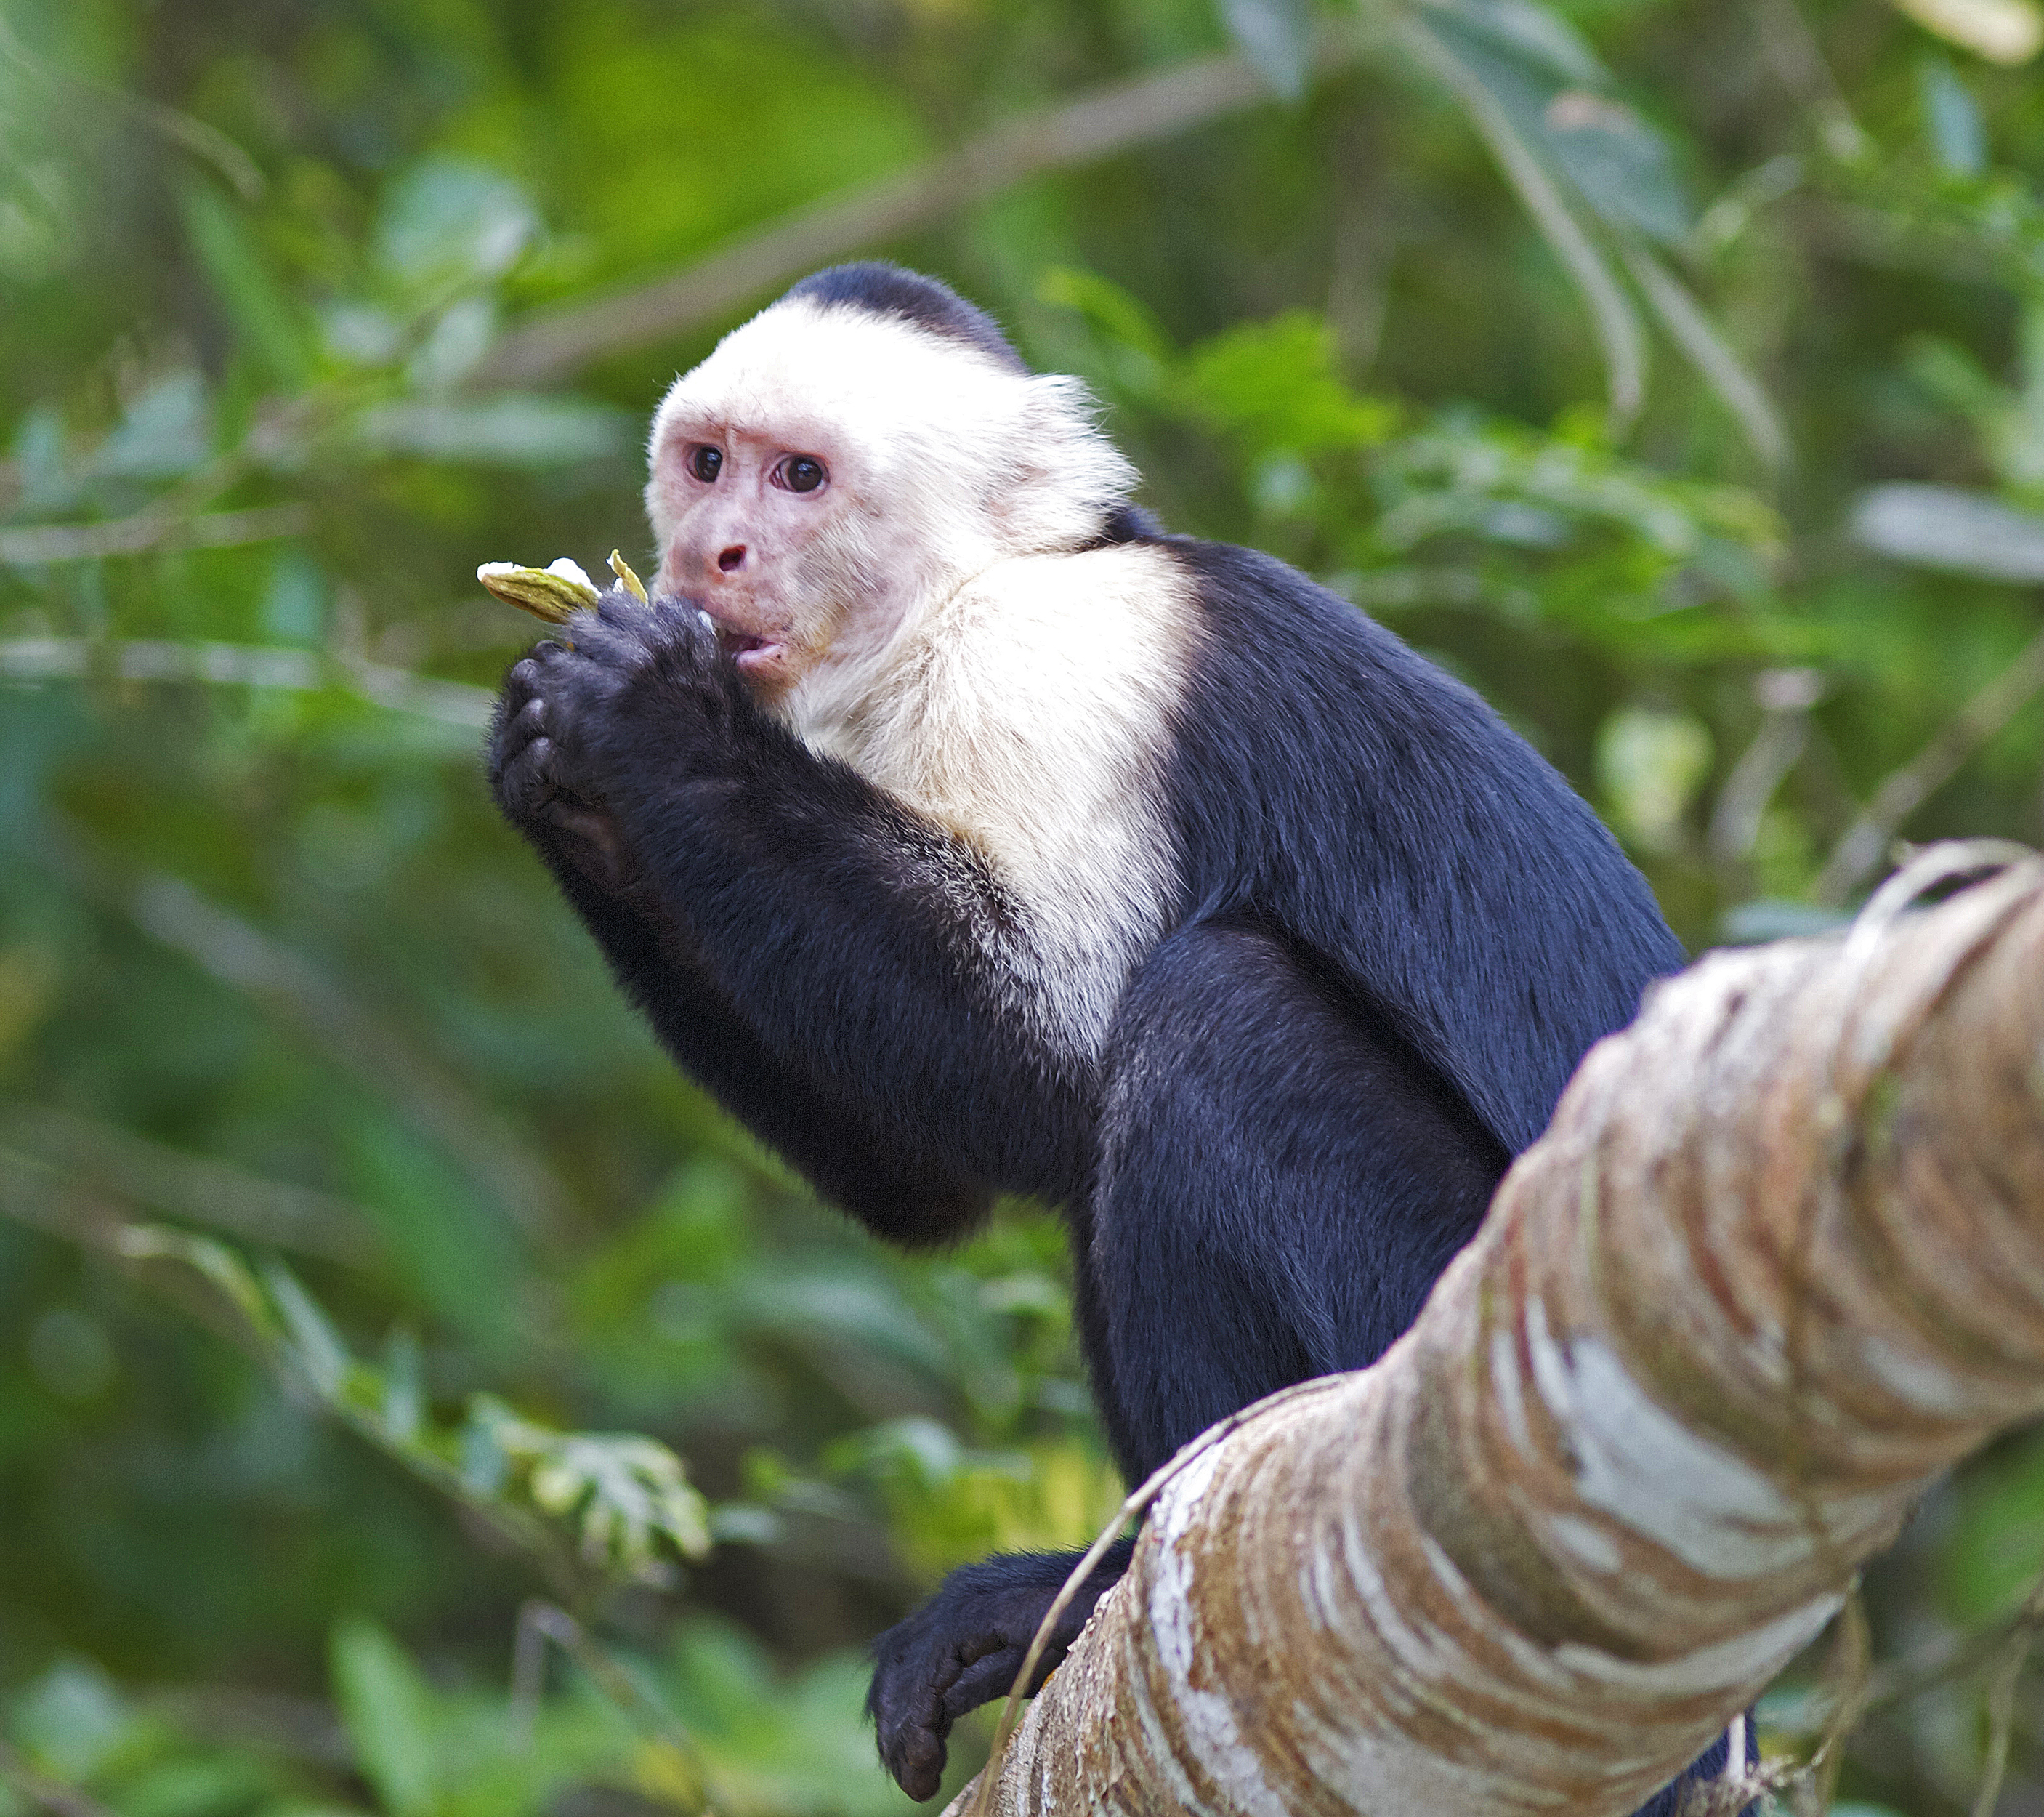 A white-faced capuchin monkey eating